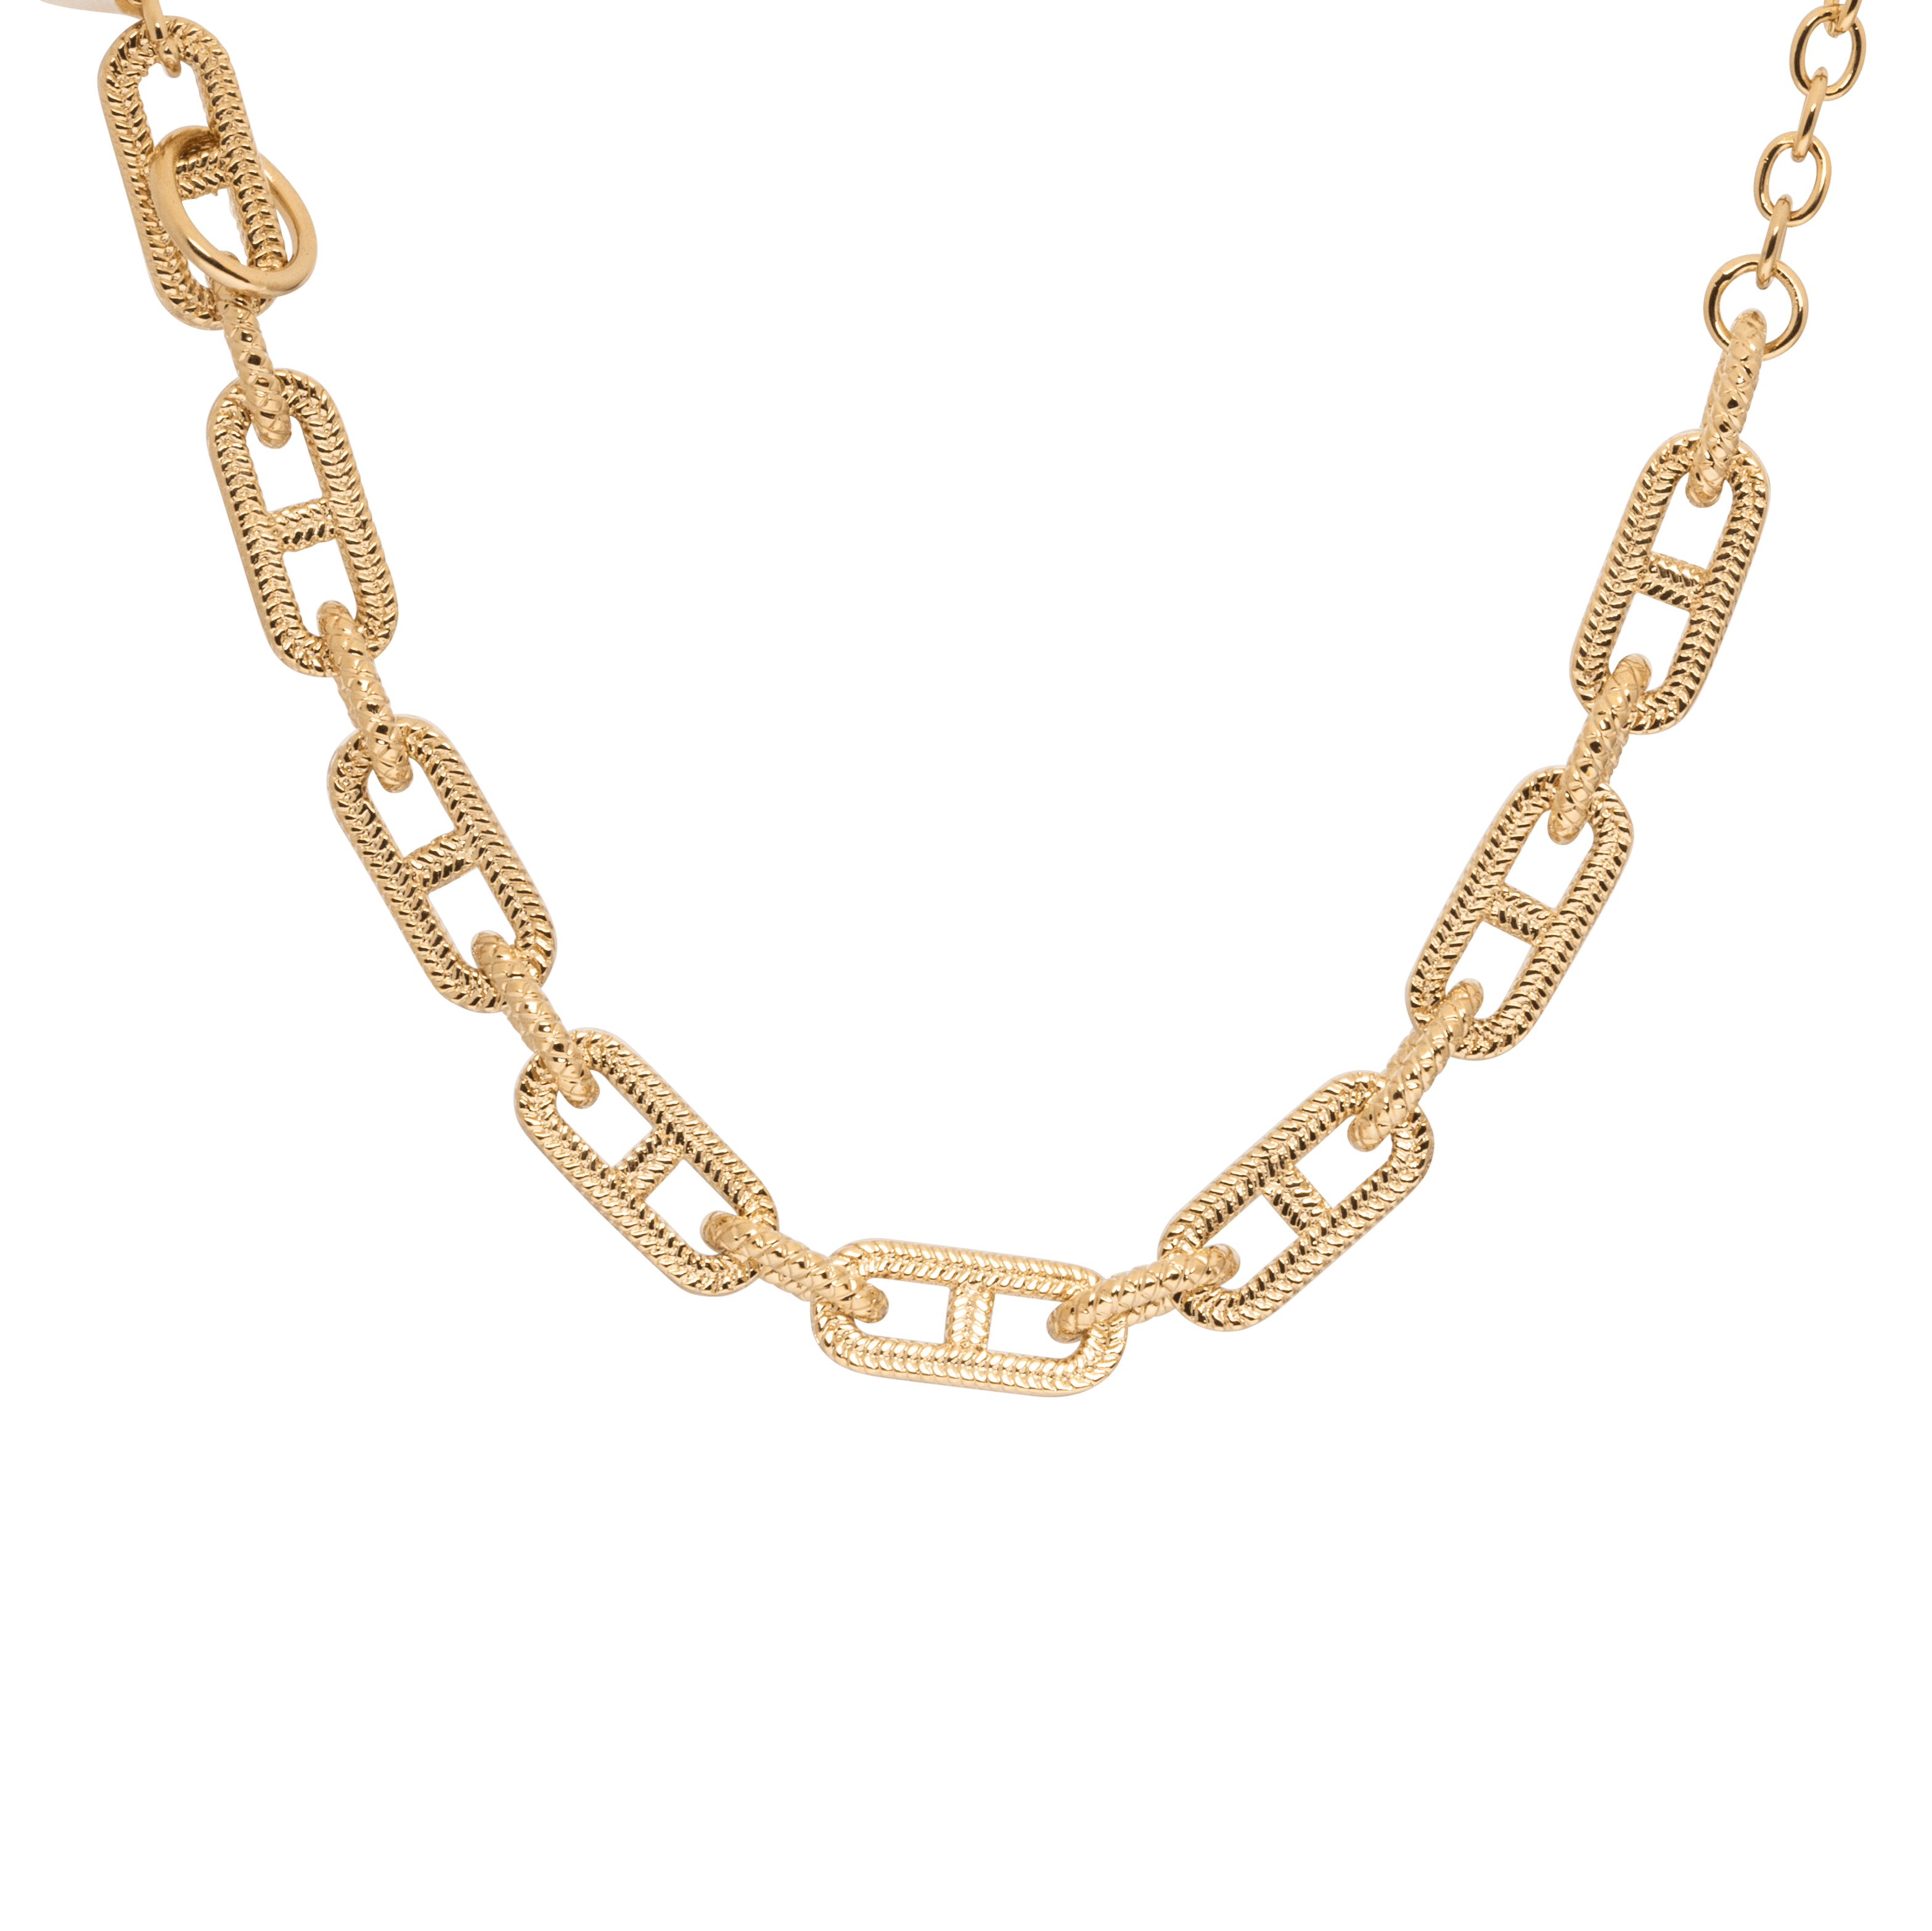 Gold Chain Dog Collar, 14mm Wide Cuban Link Dog Collar, Cute Fashion  Necklace for Pit Bulldog Dogs, Light Metal Chain Jewelry, Puppy Accessories  - Walmart.com